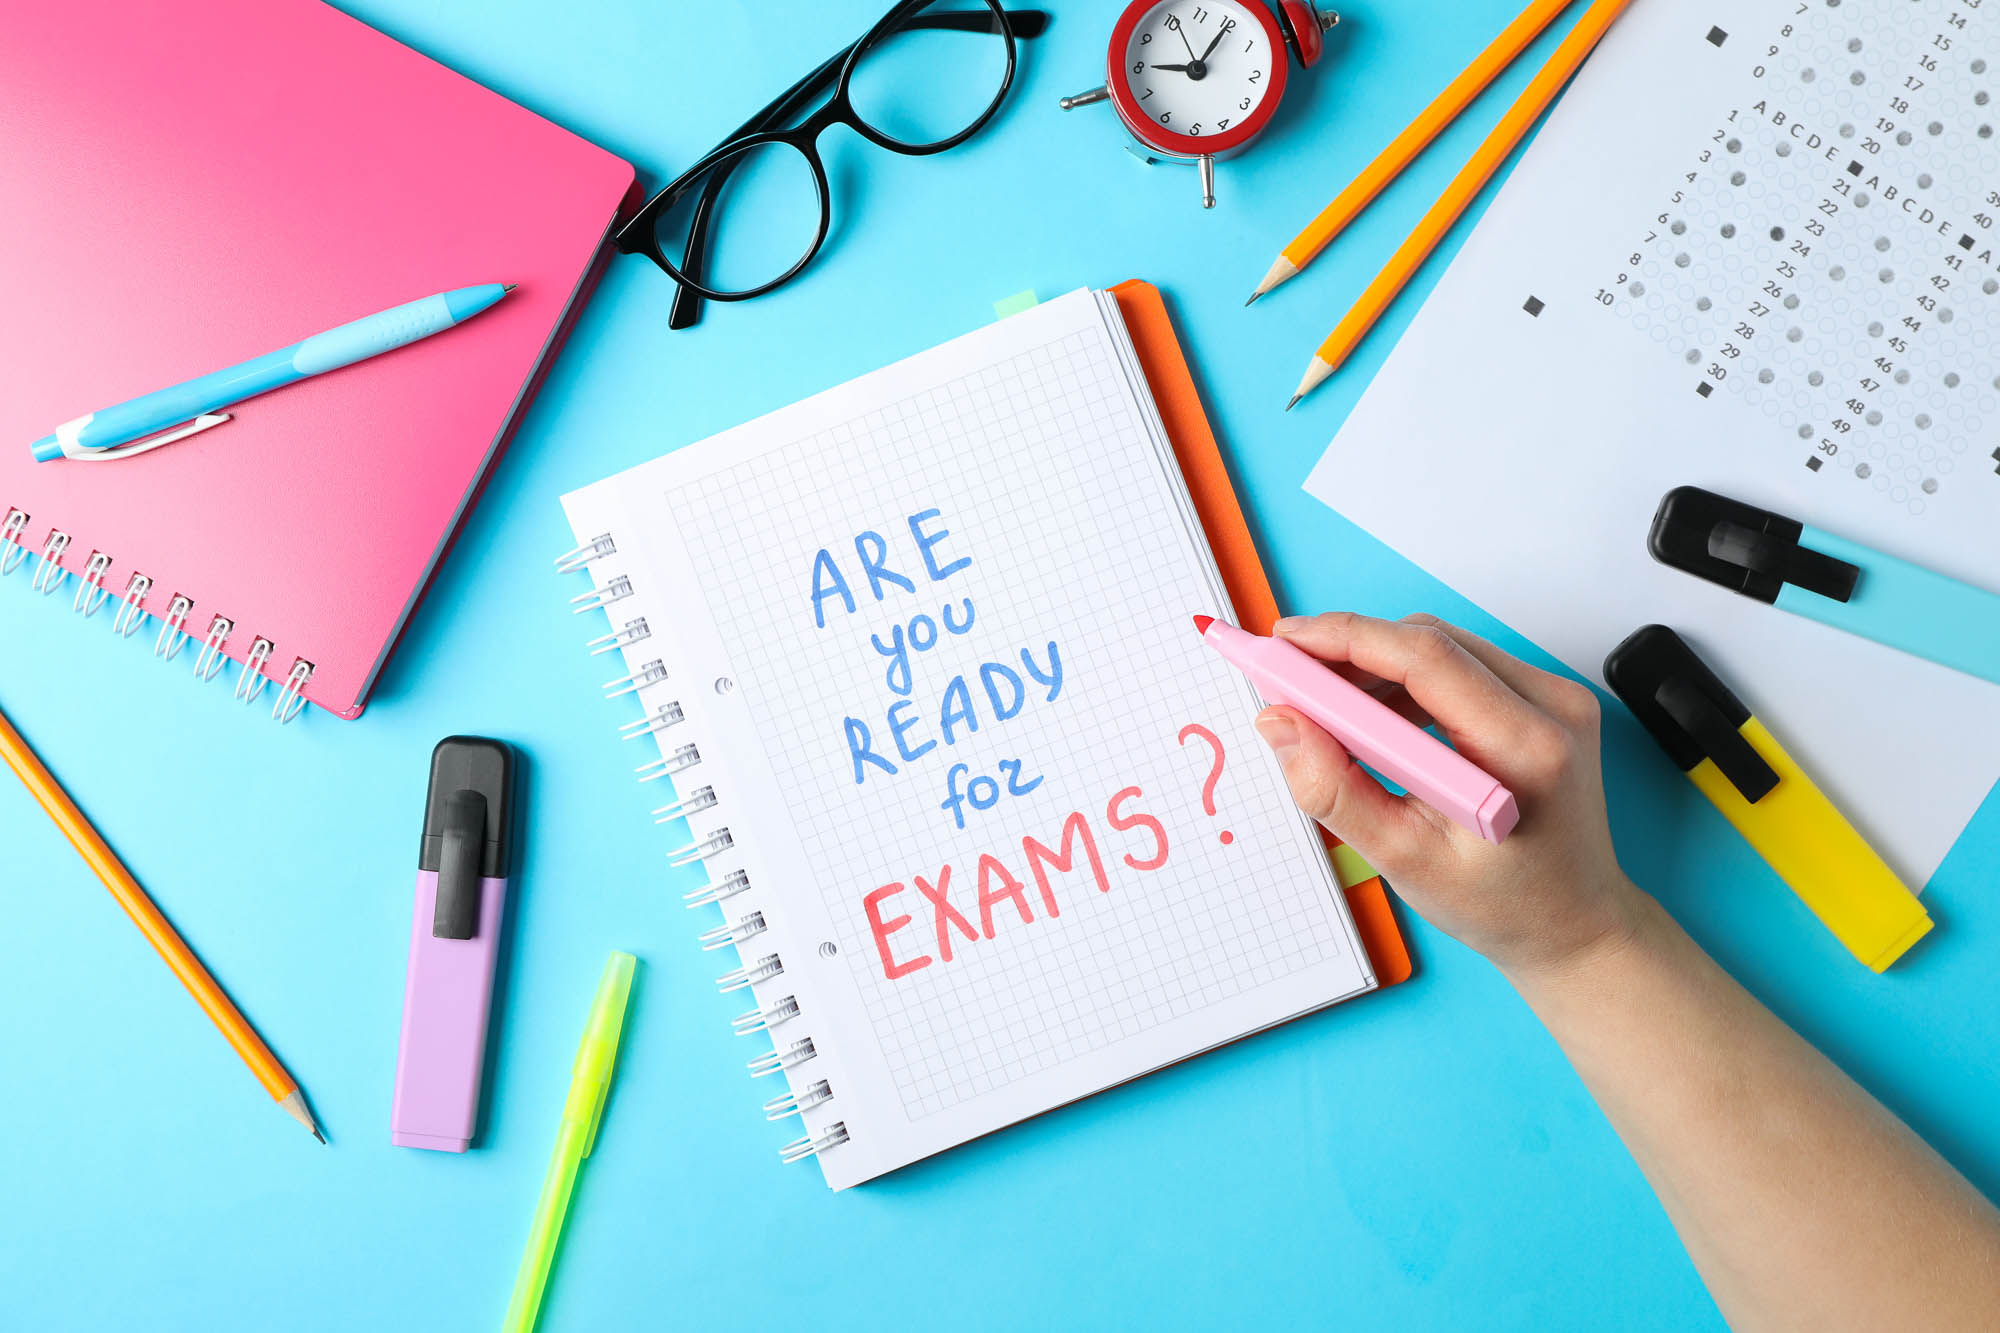 card reading 'are you ready for exams' amid study supplies